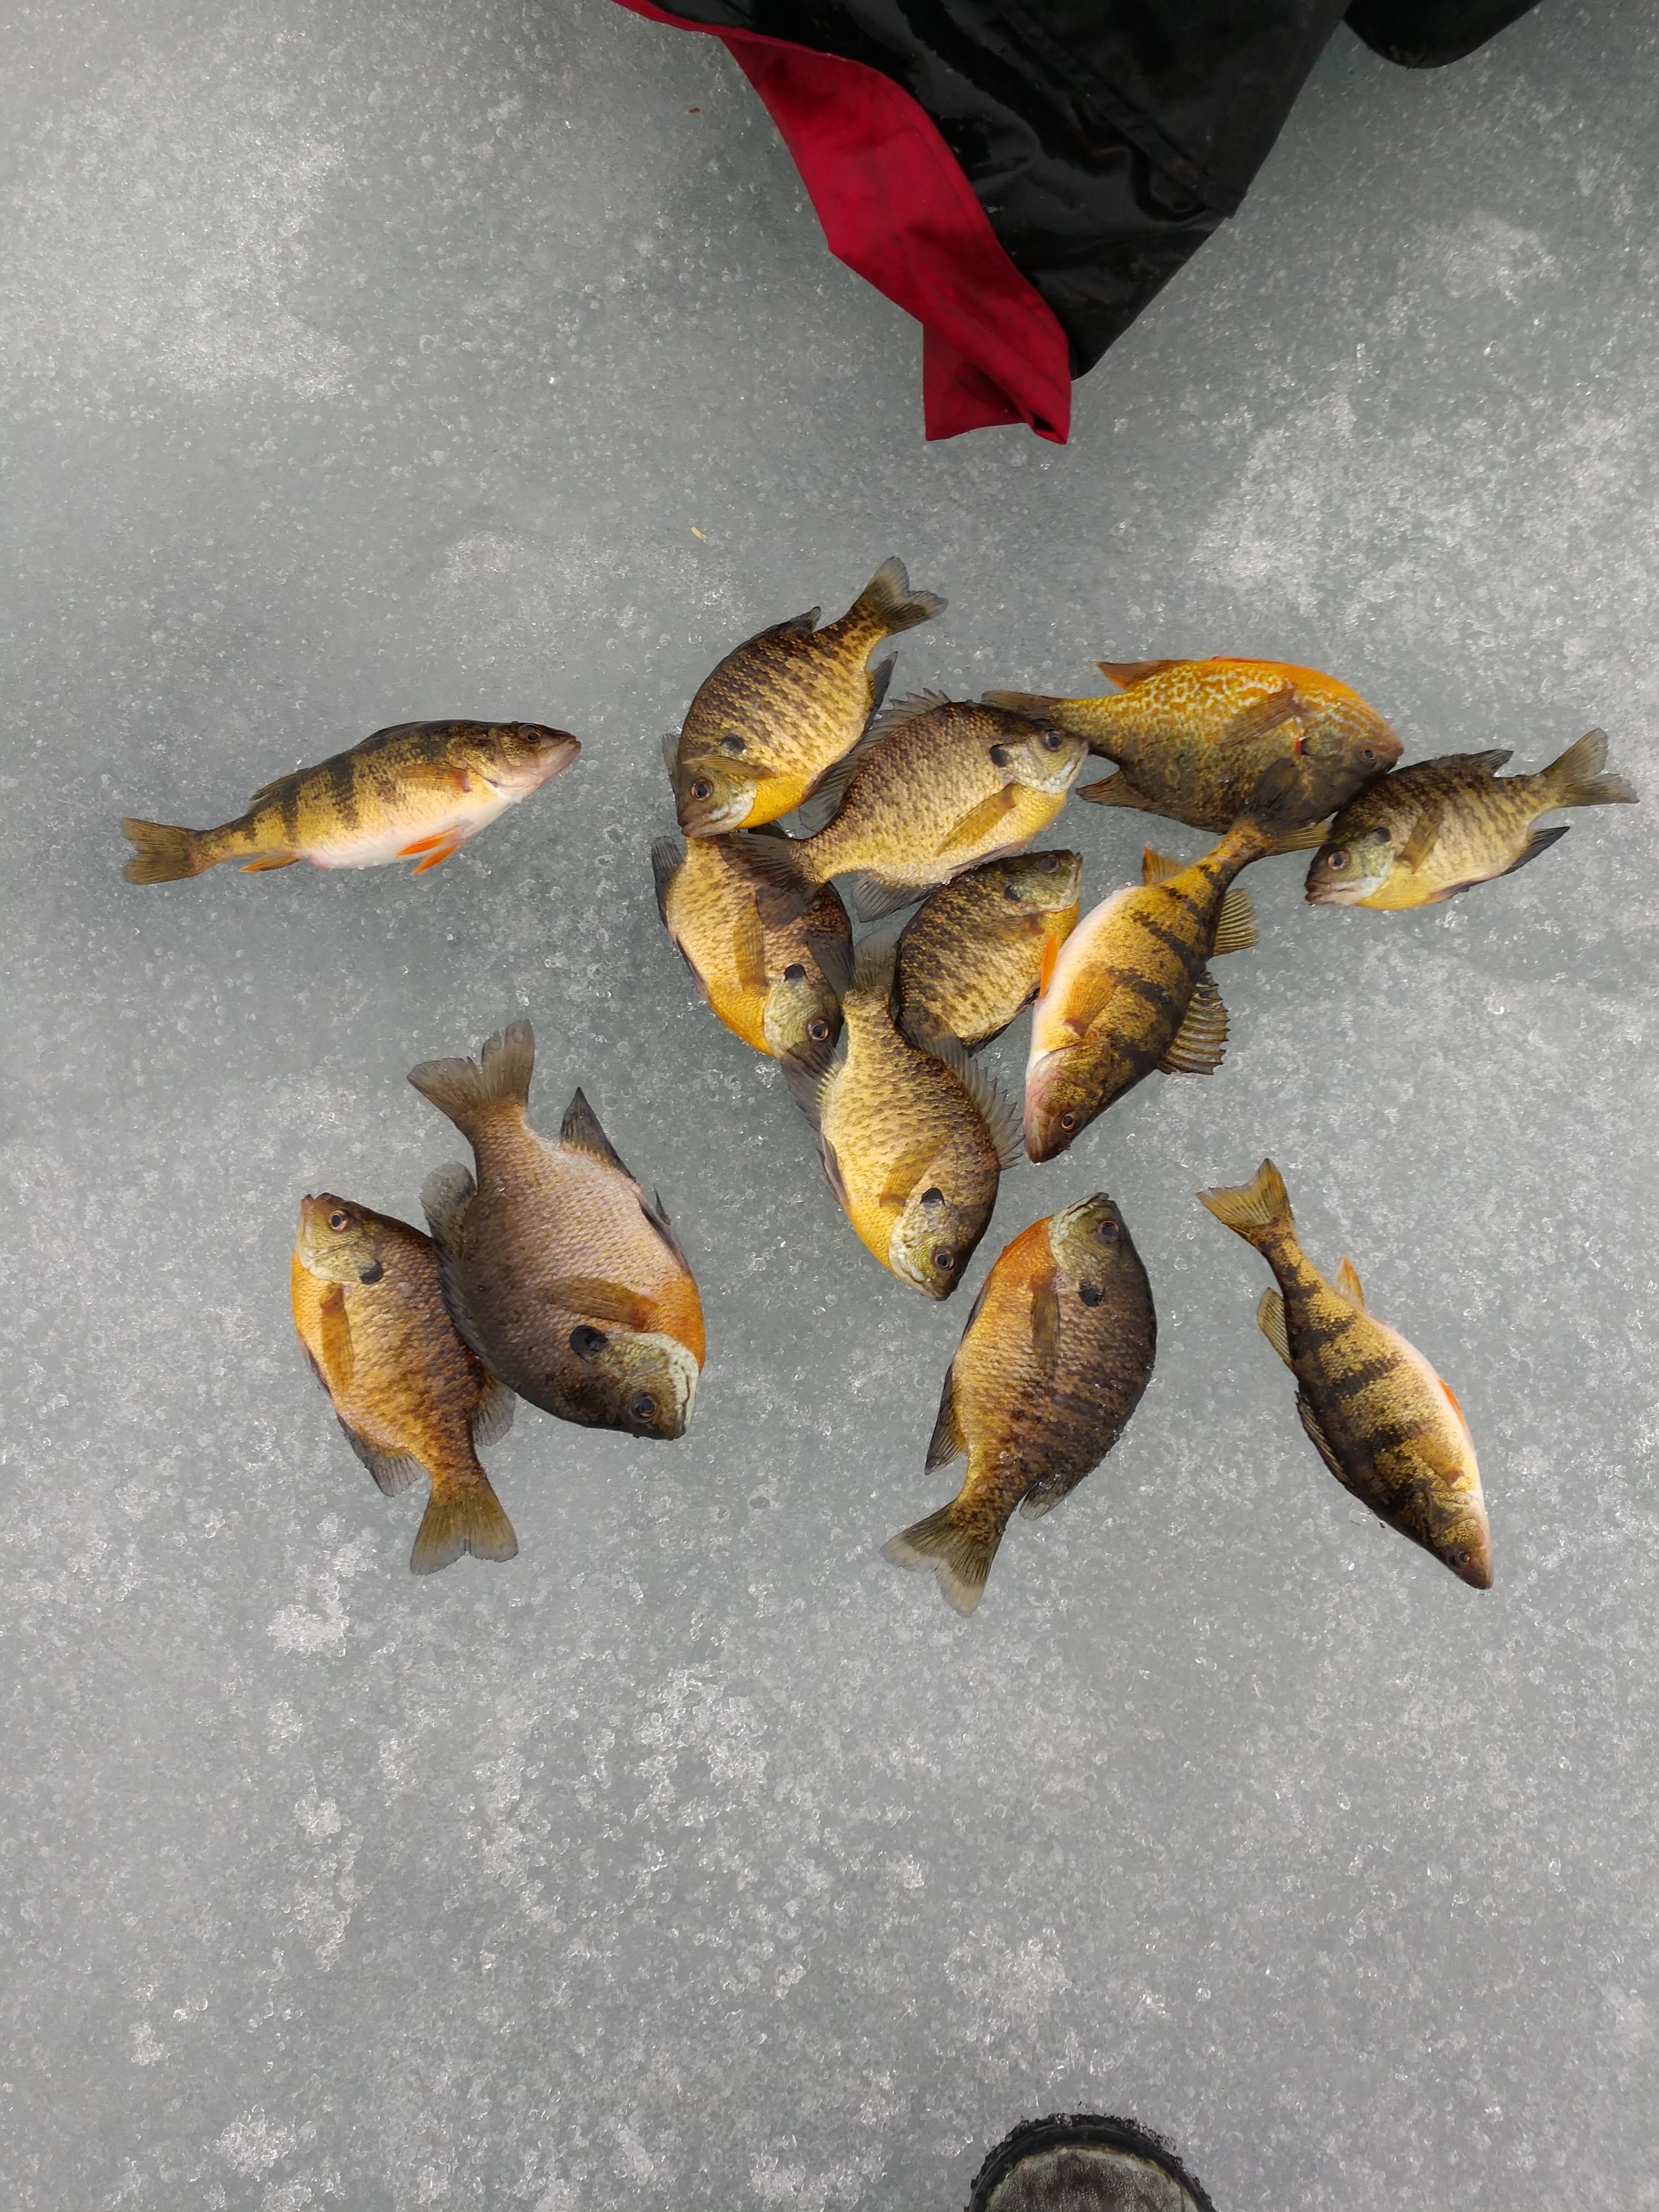 How do I target Perch through the ice? - Ice Fishing Forum - Ice